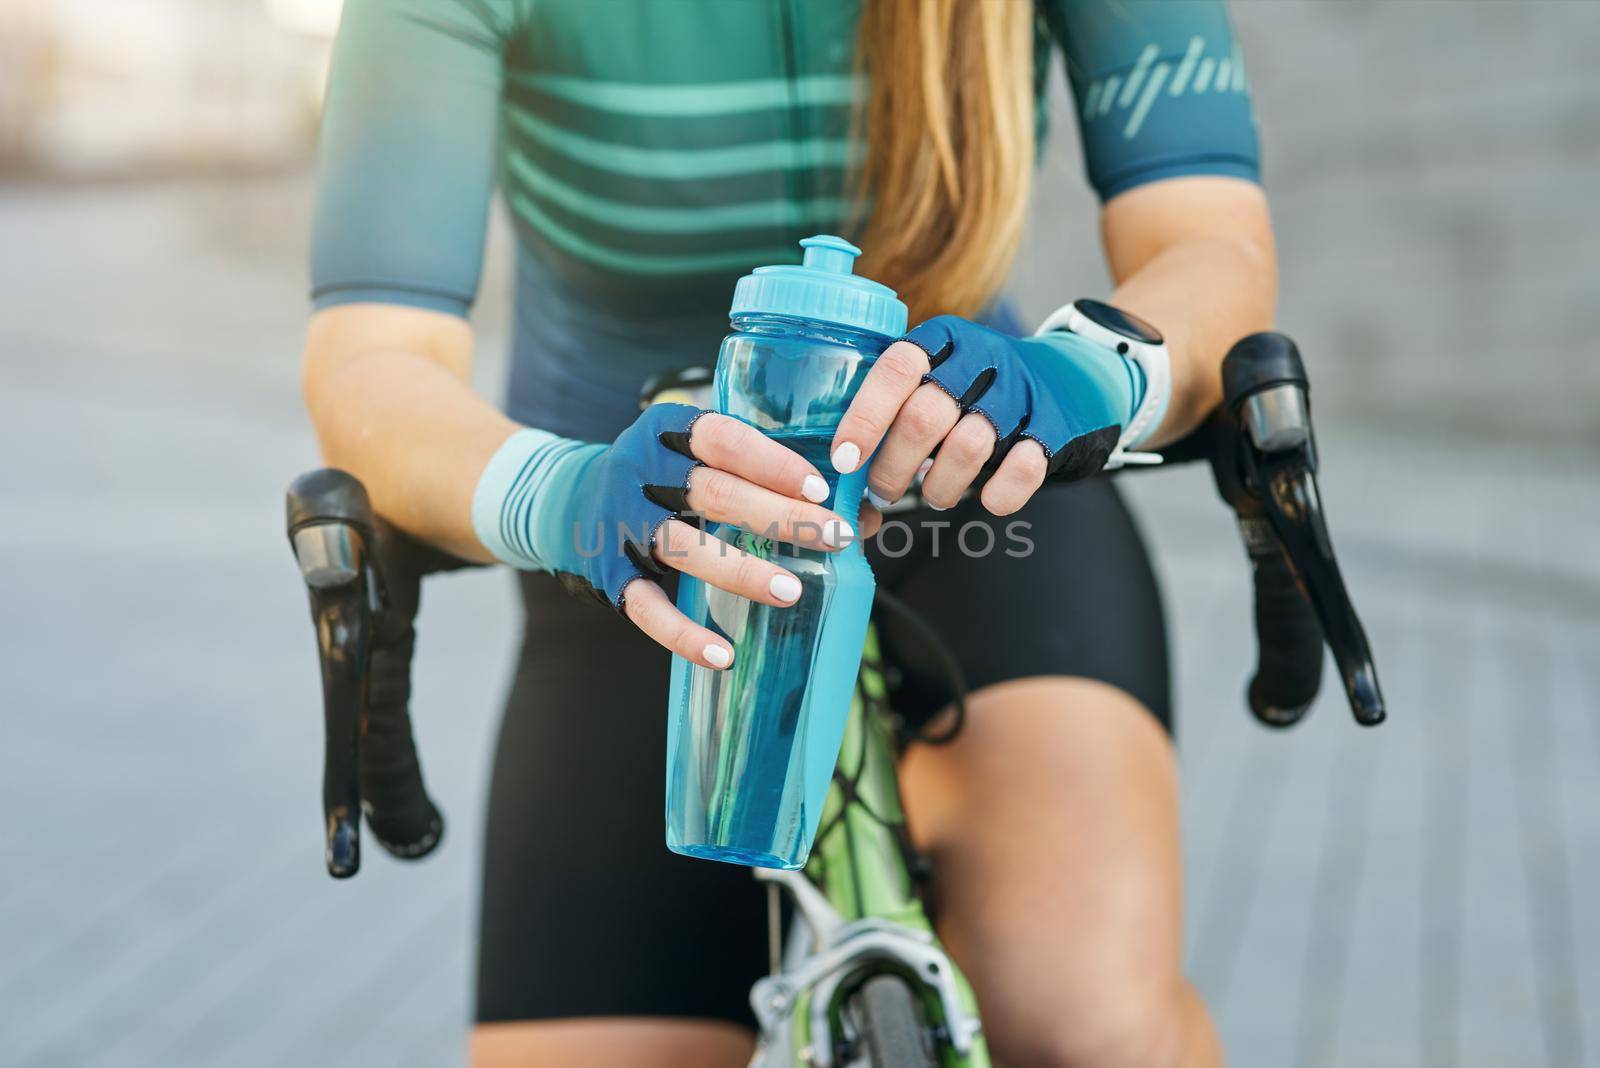 Cropped shot of professional female cyclist holding water bottle, resting, standing with her bike outdoors on a daytime by friendsstock